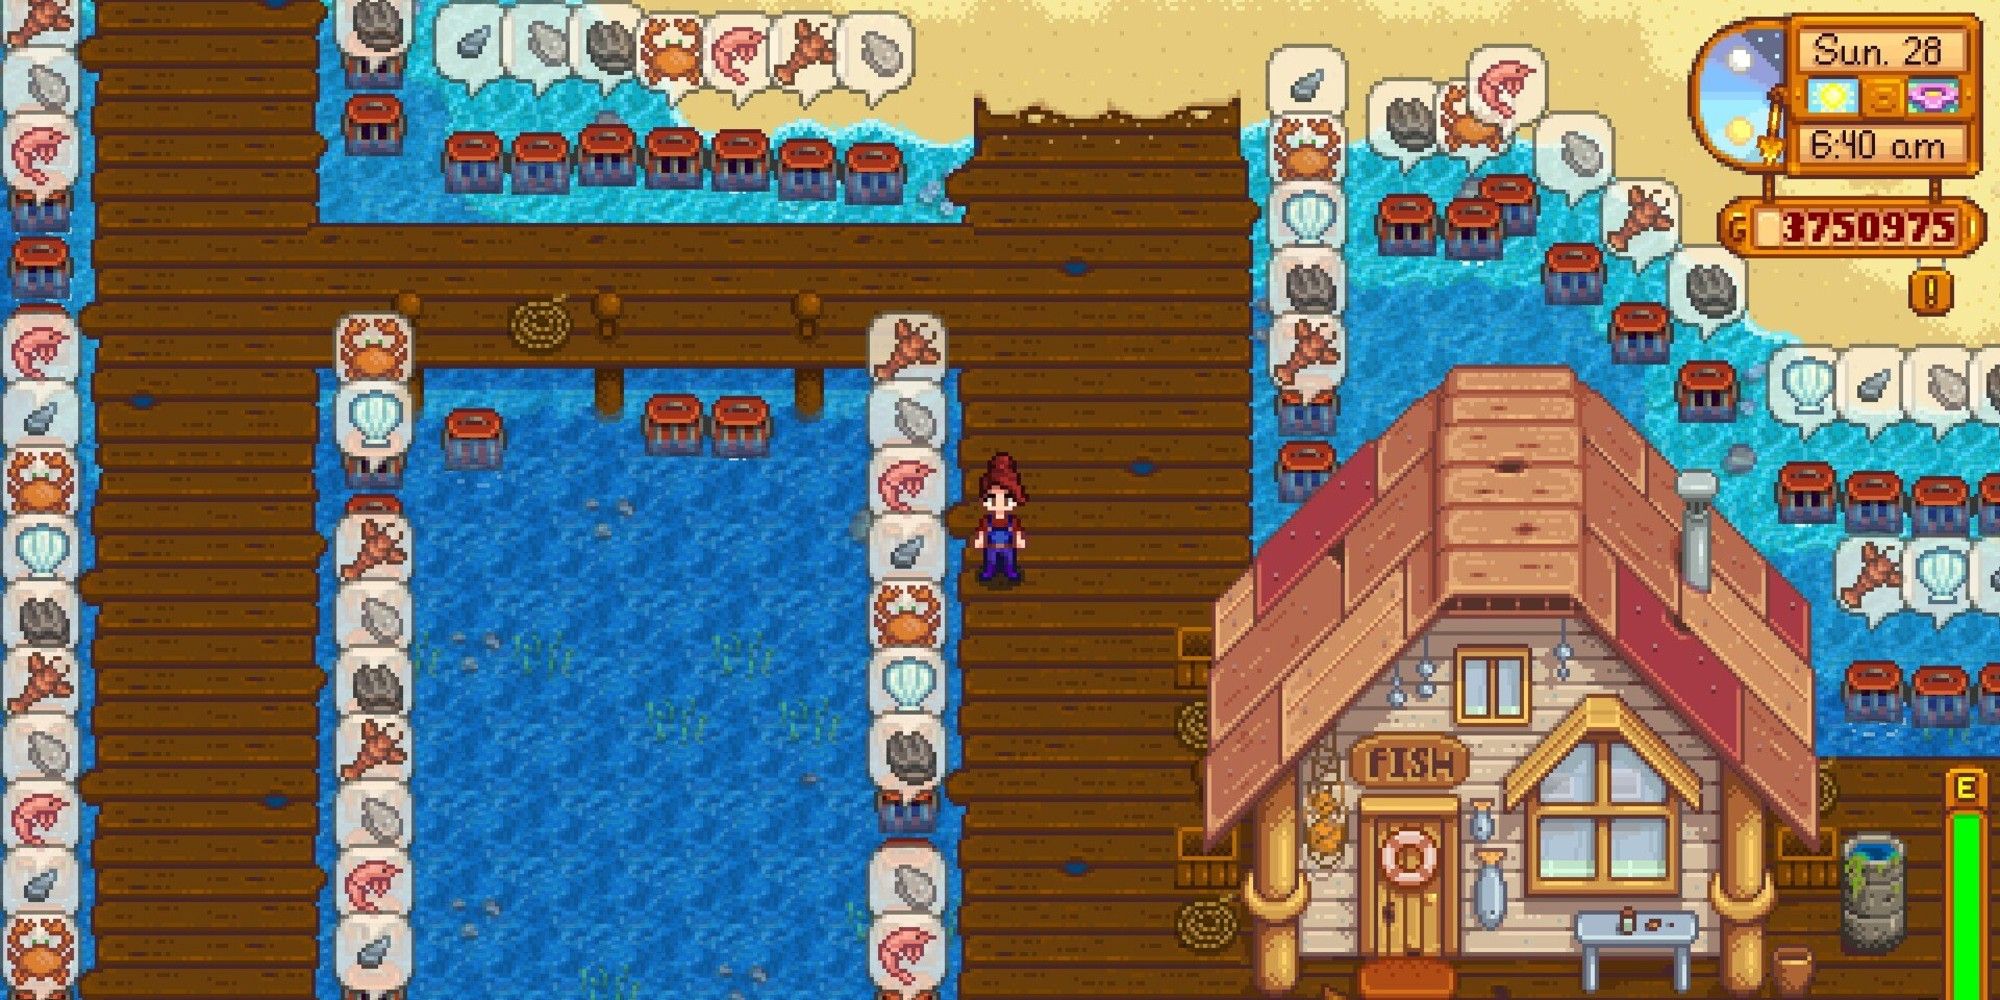 player standing on beach pier with a lot of crab pots placed